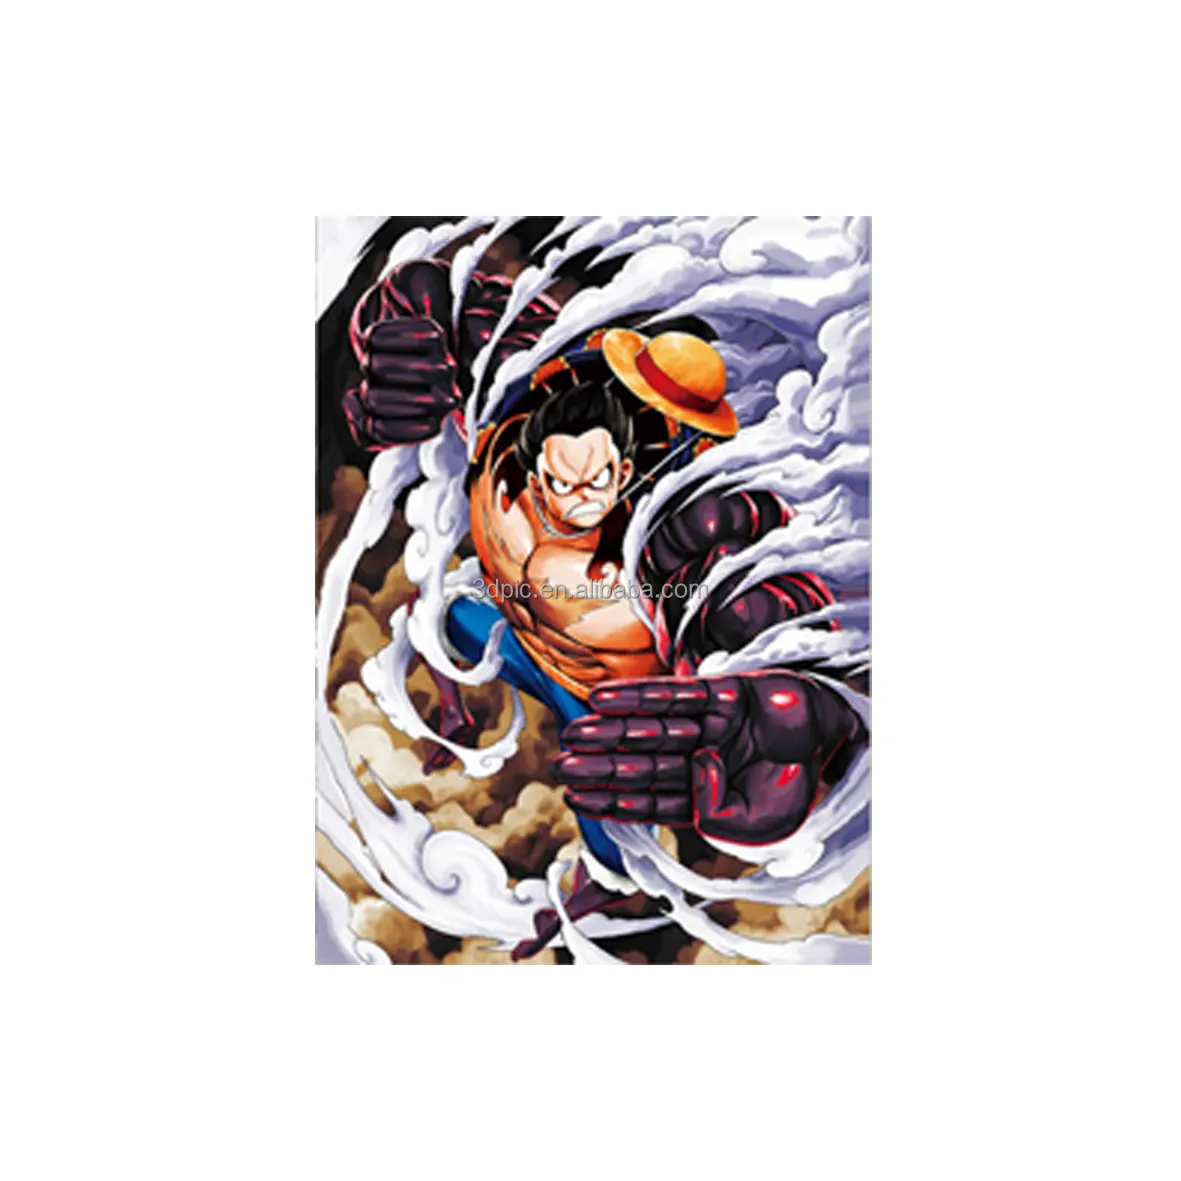 Anime poster One Piece 3D anime <span class=keywords><strong>opere</strong></span> <span class=keywords><strong>d</strong></span>'<span class=keywords><strong>arte</strong></span> 3D tripla transizione flip poster wall art decor 3D lenticolare Poster